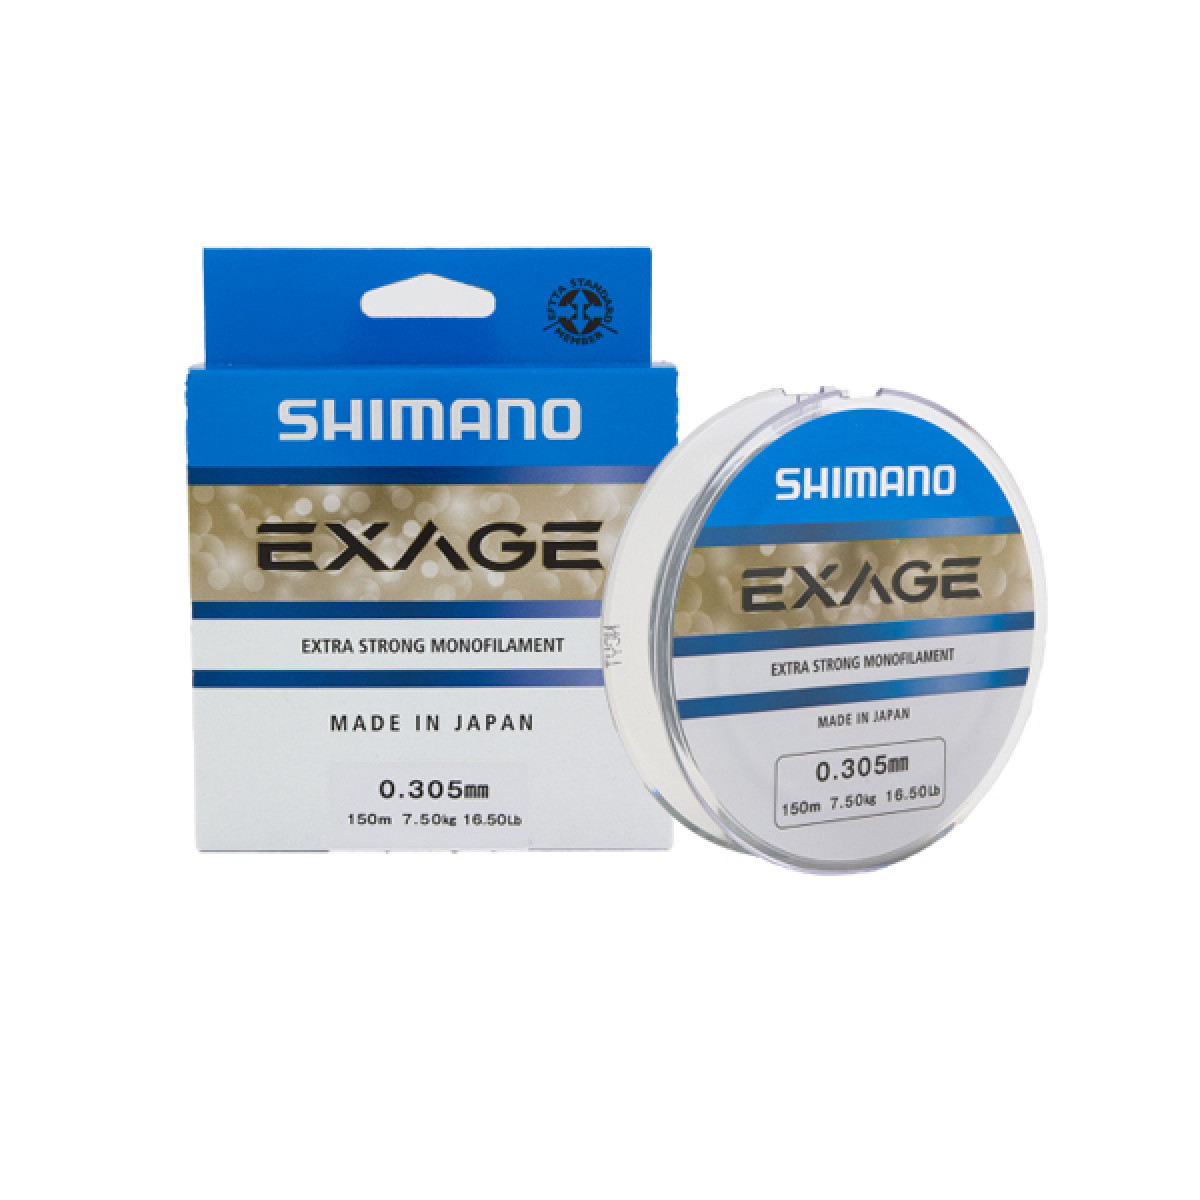 SHIMANO EXAGE EXTRA STRONG 150M